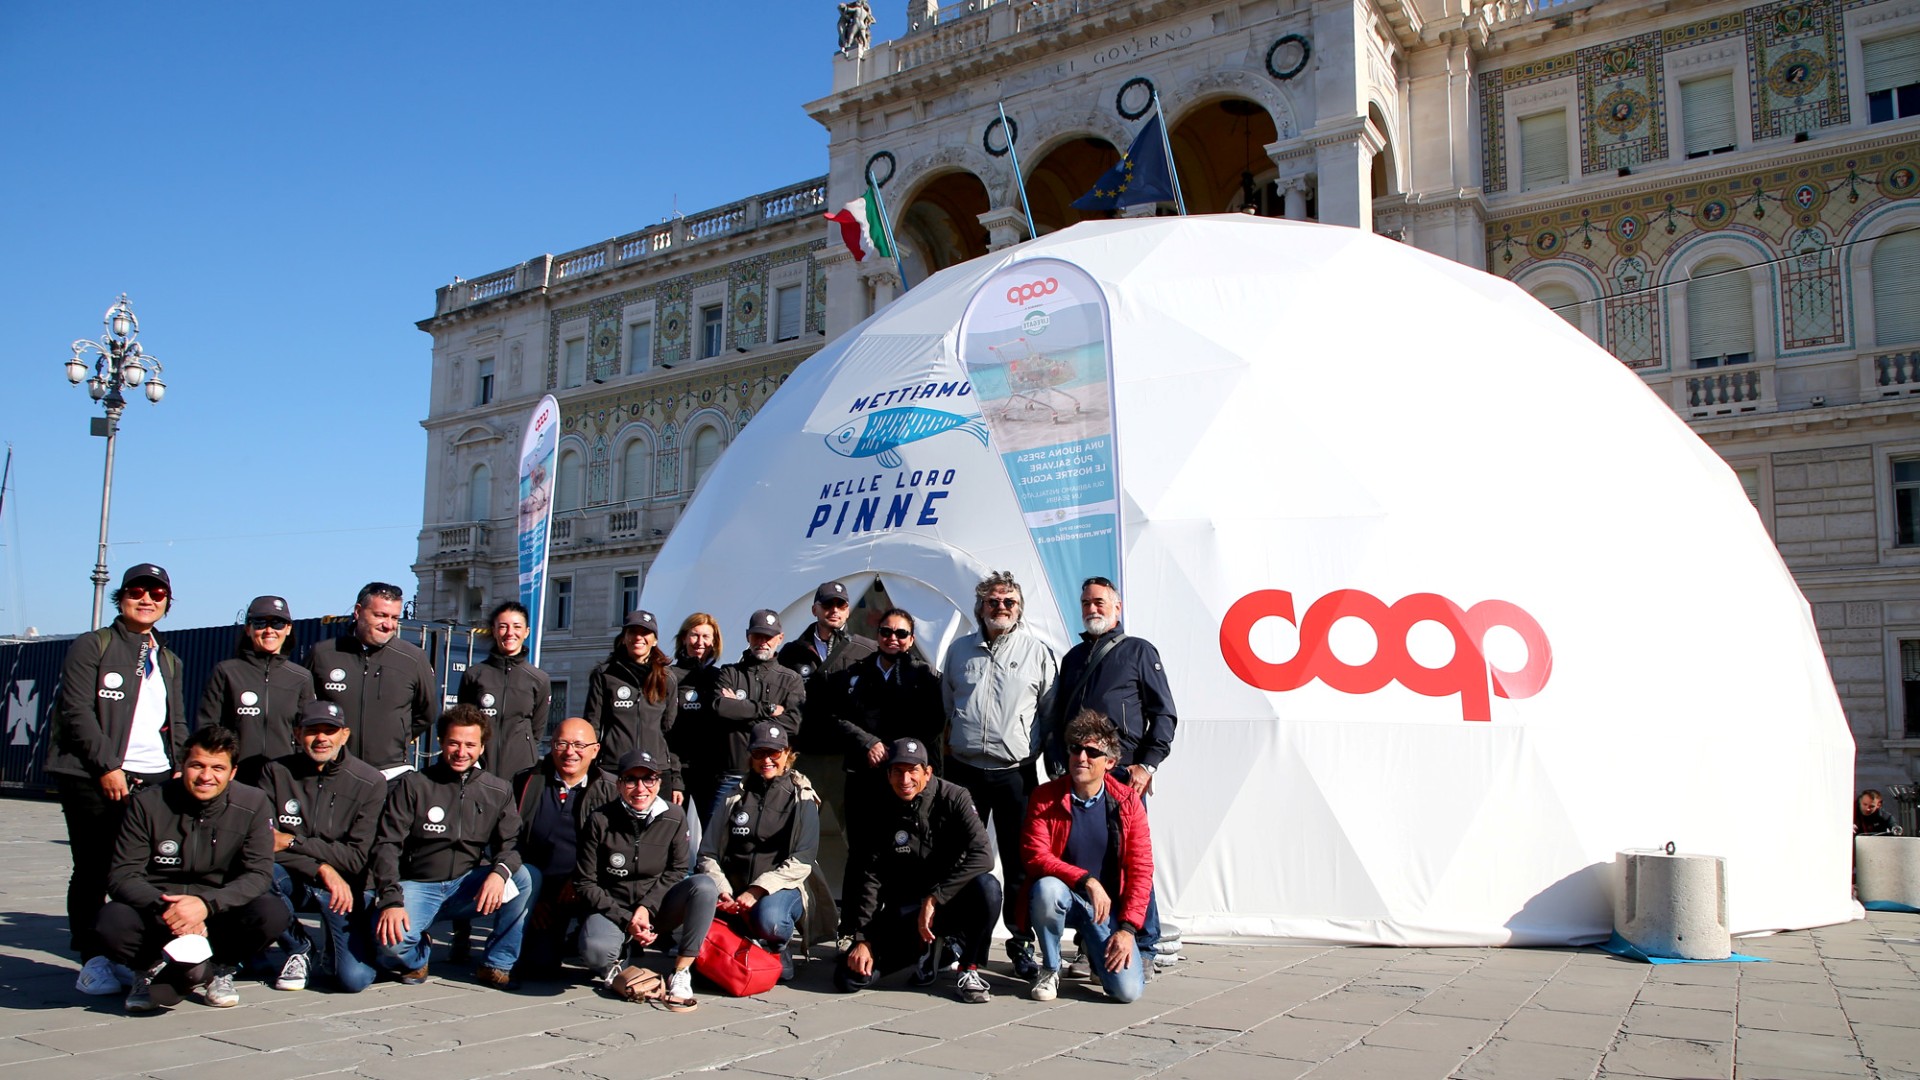 stand coop trieste barcolana